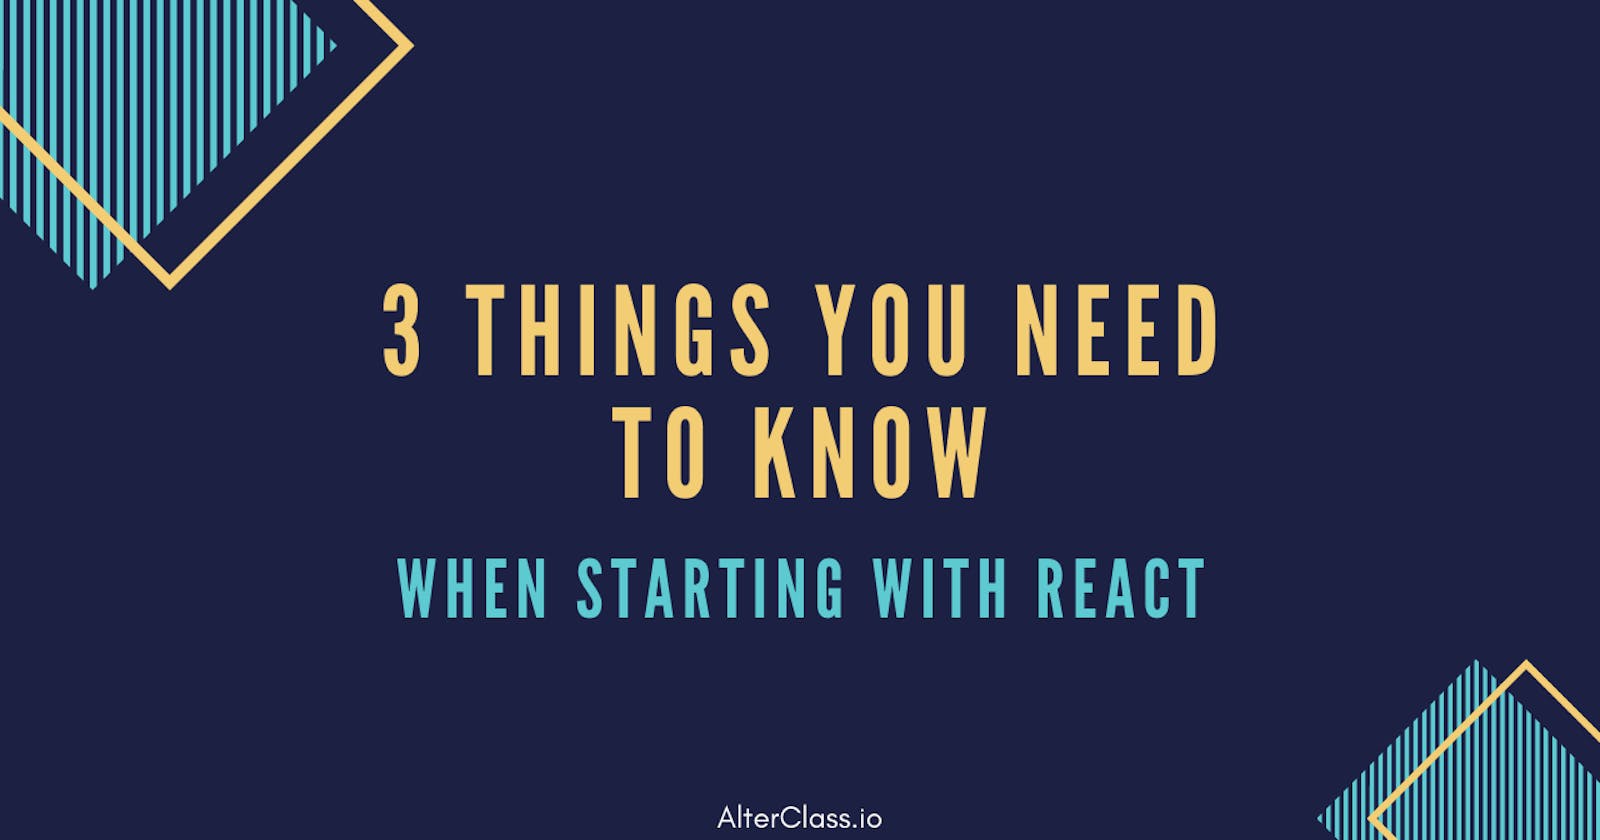 3 THINGS YOU NEED TO KNOW When Starting With React